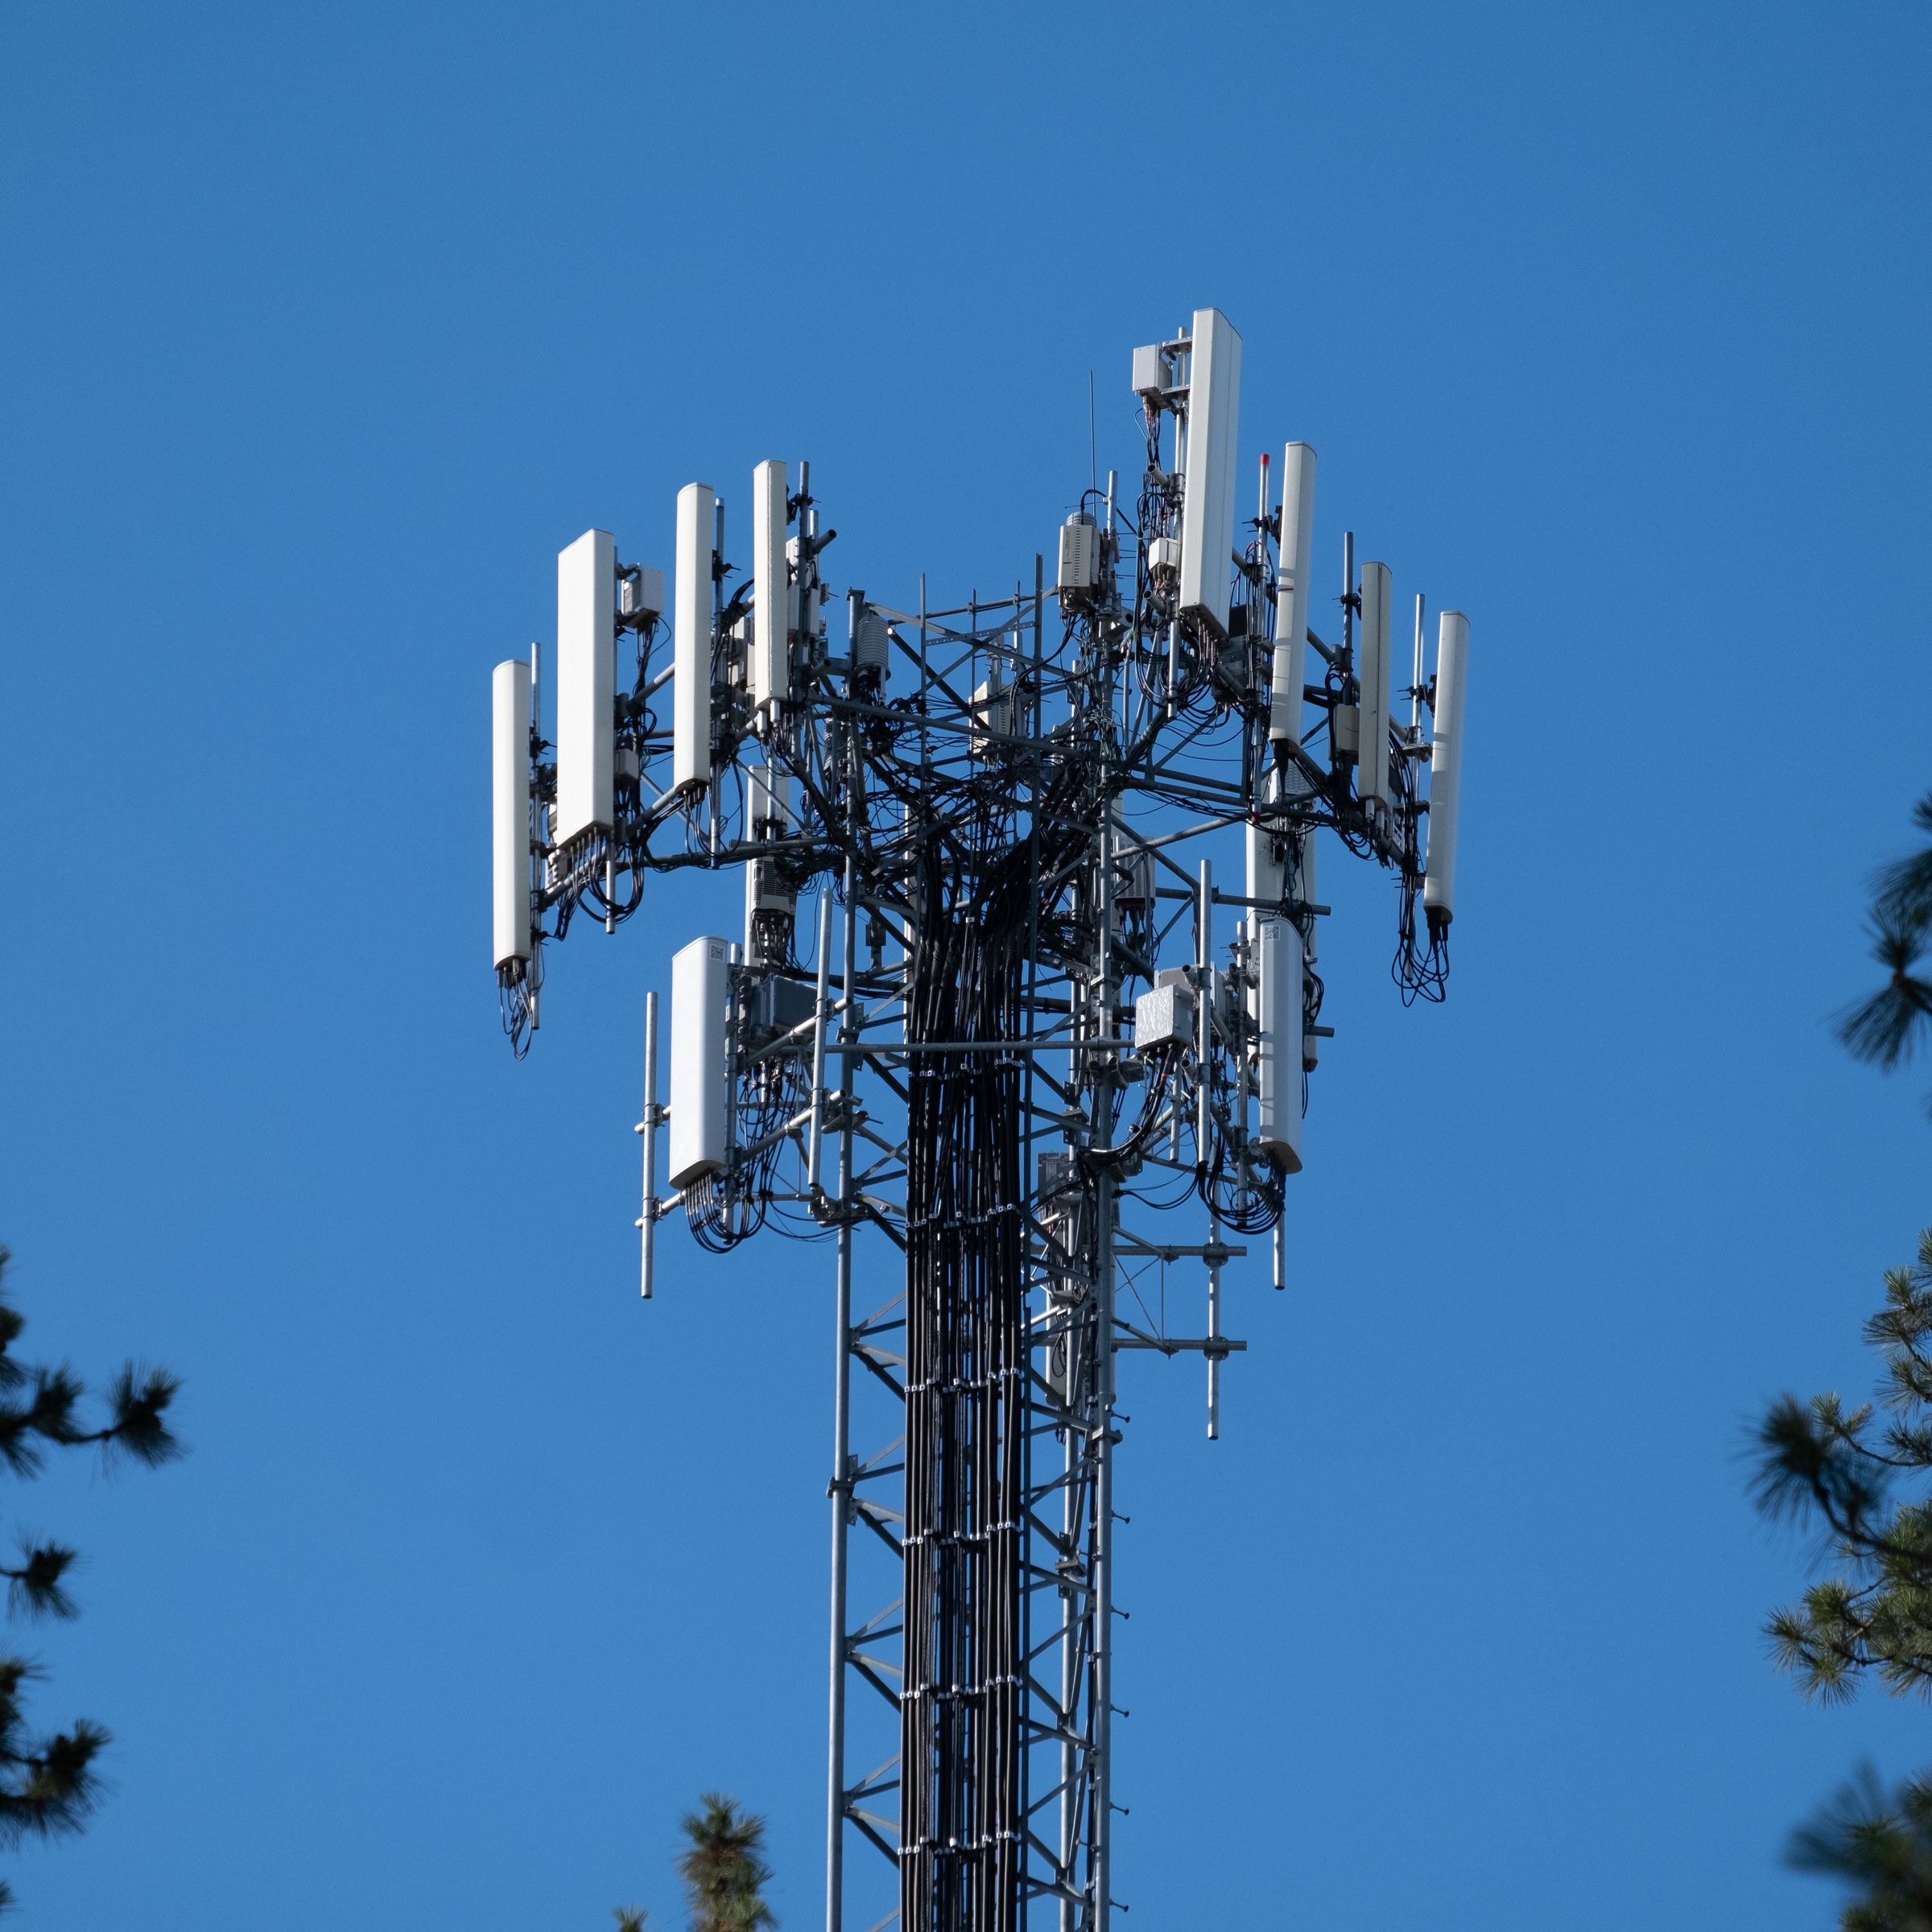 Photo of a 5G cell tower